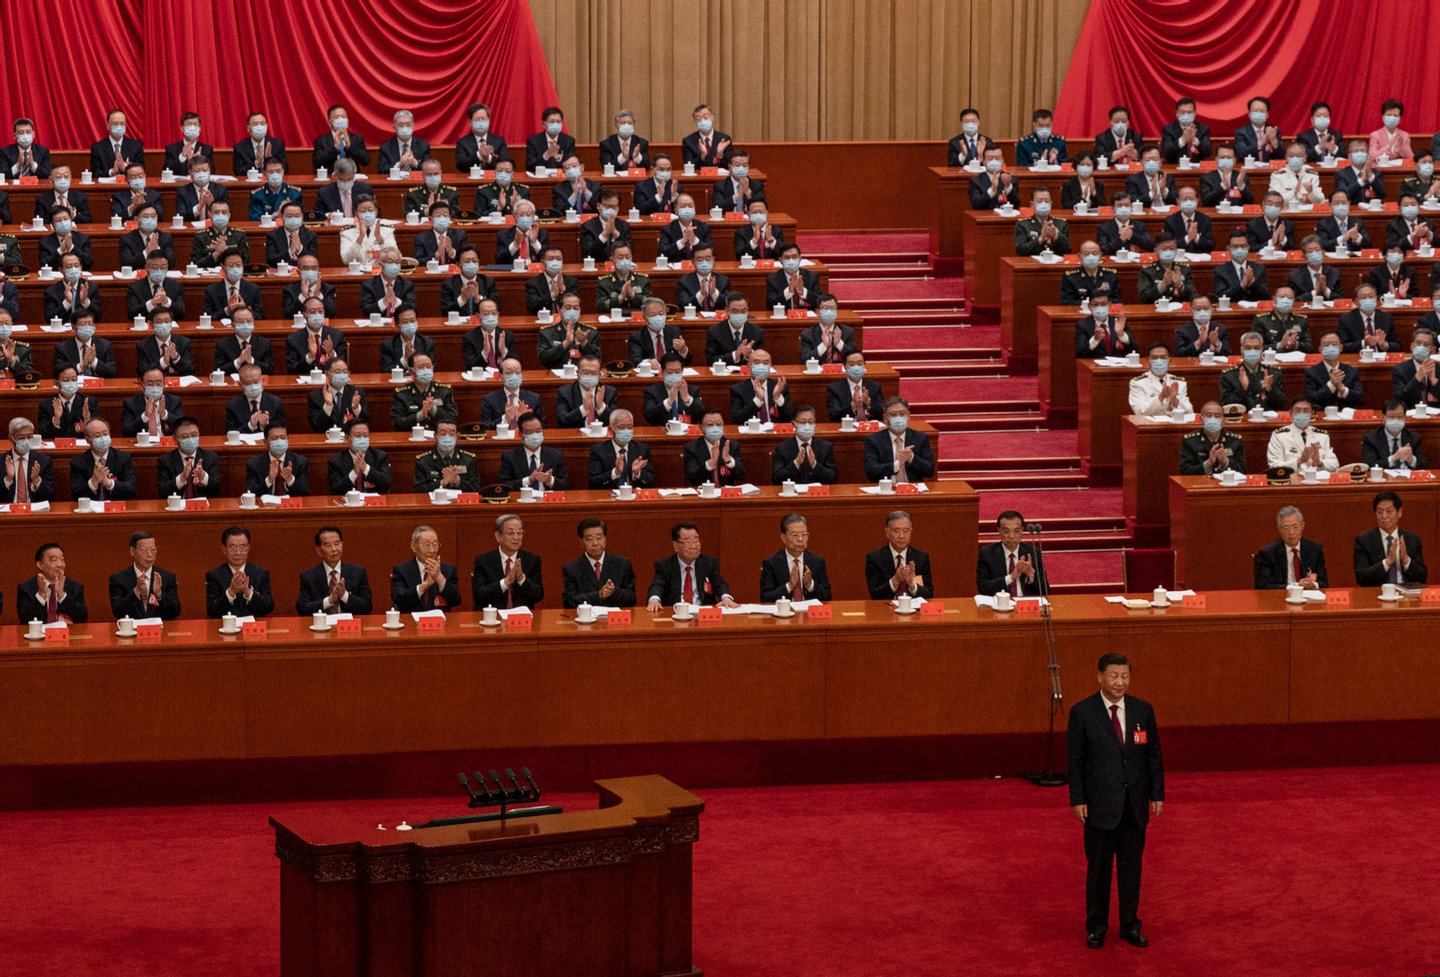 Opening Ceremony Of The 20th National Congress Of The Communist Party Of China